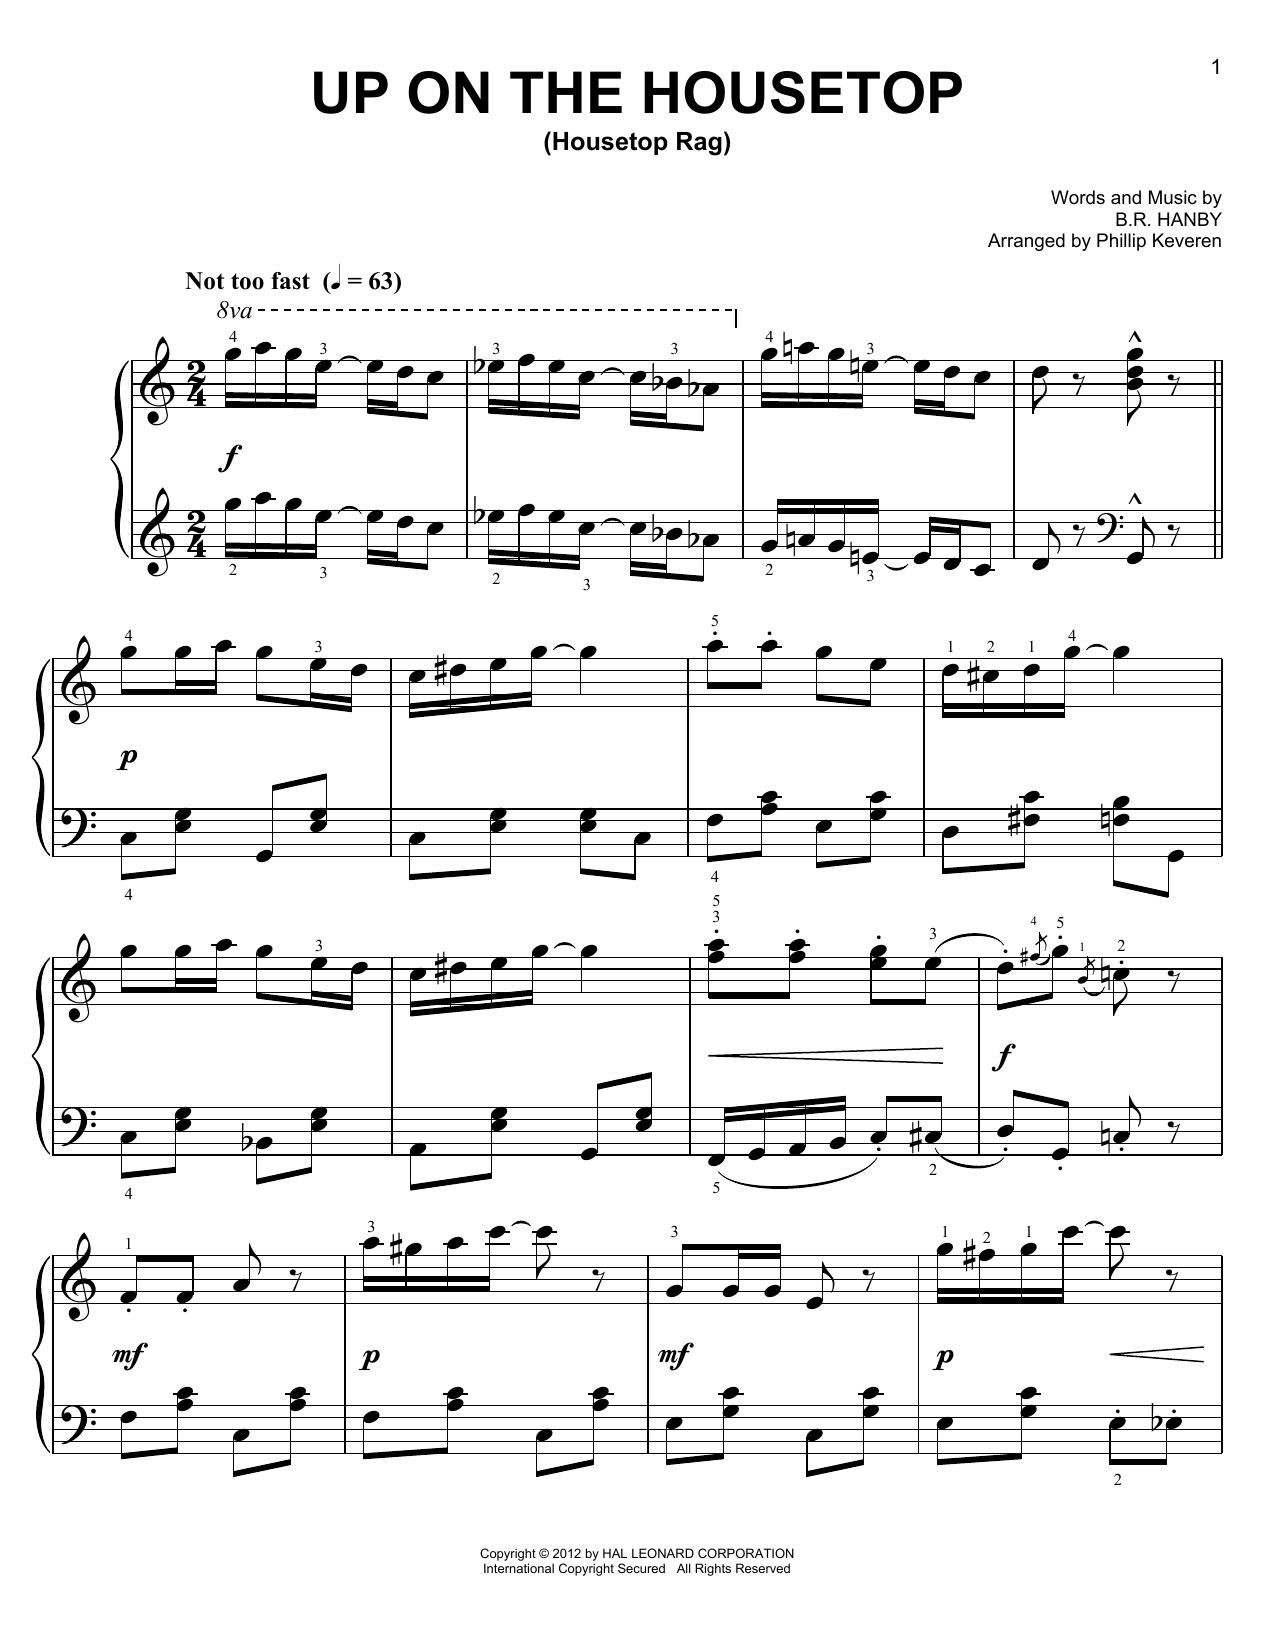 B.R. Hanby Up On The Housetop [Ragtime version] (arr. Phillip Keveren) sheet music notes and chords. Download Printable PDF.